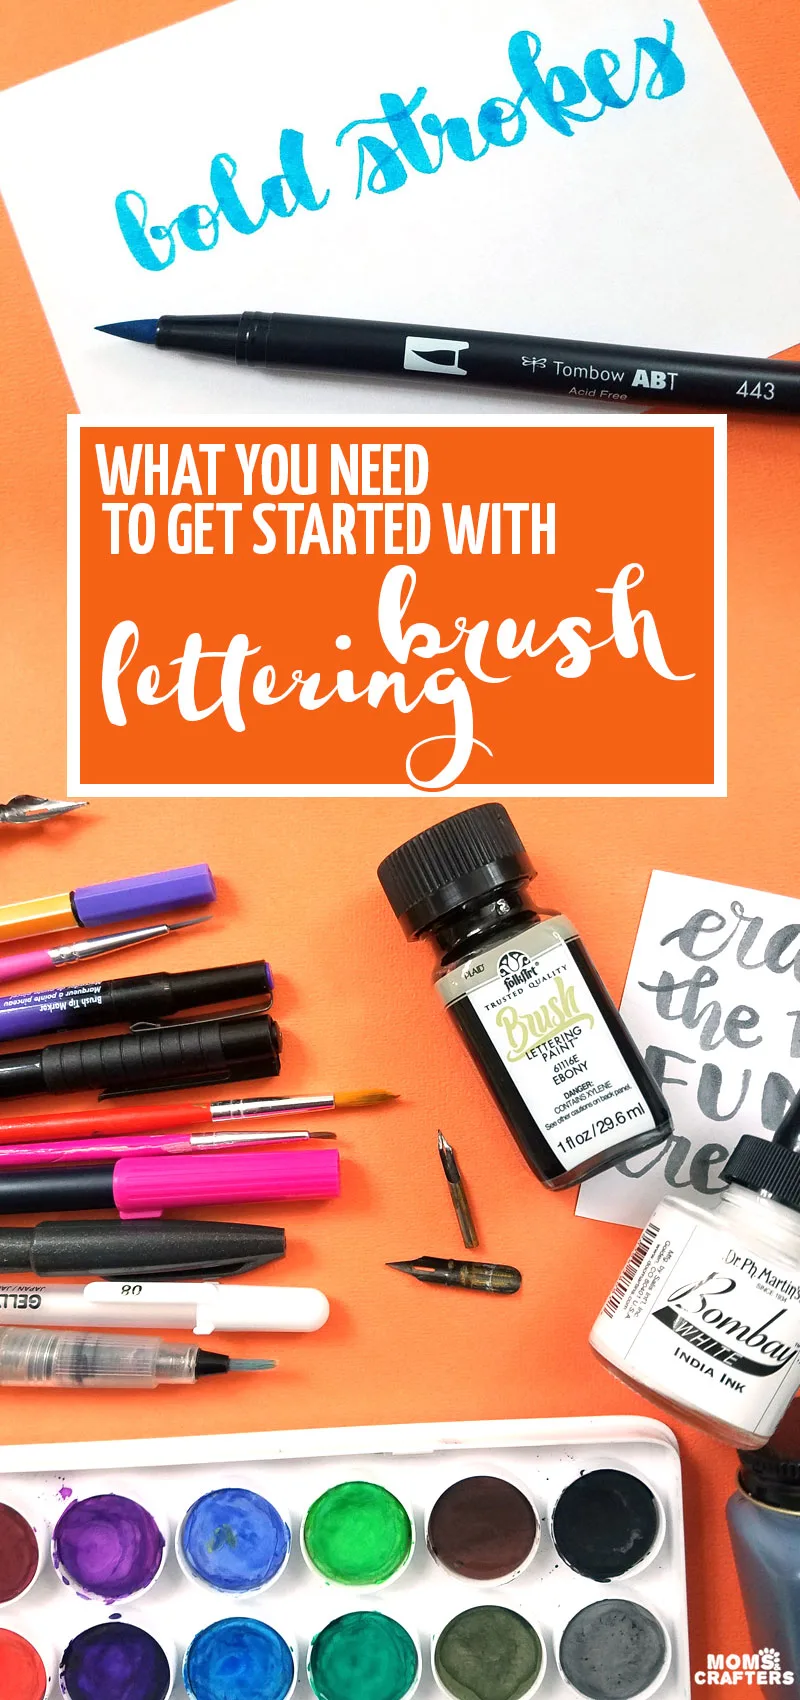 Click for some brush lettering 101 tips! These are teh best brush pens for lettering, as well as the best hand lettering brush for using ink or watercolors #lettering #brushlettering #calligraphy #brushcalligraphy #handlettering #watercolors